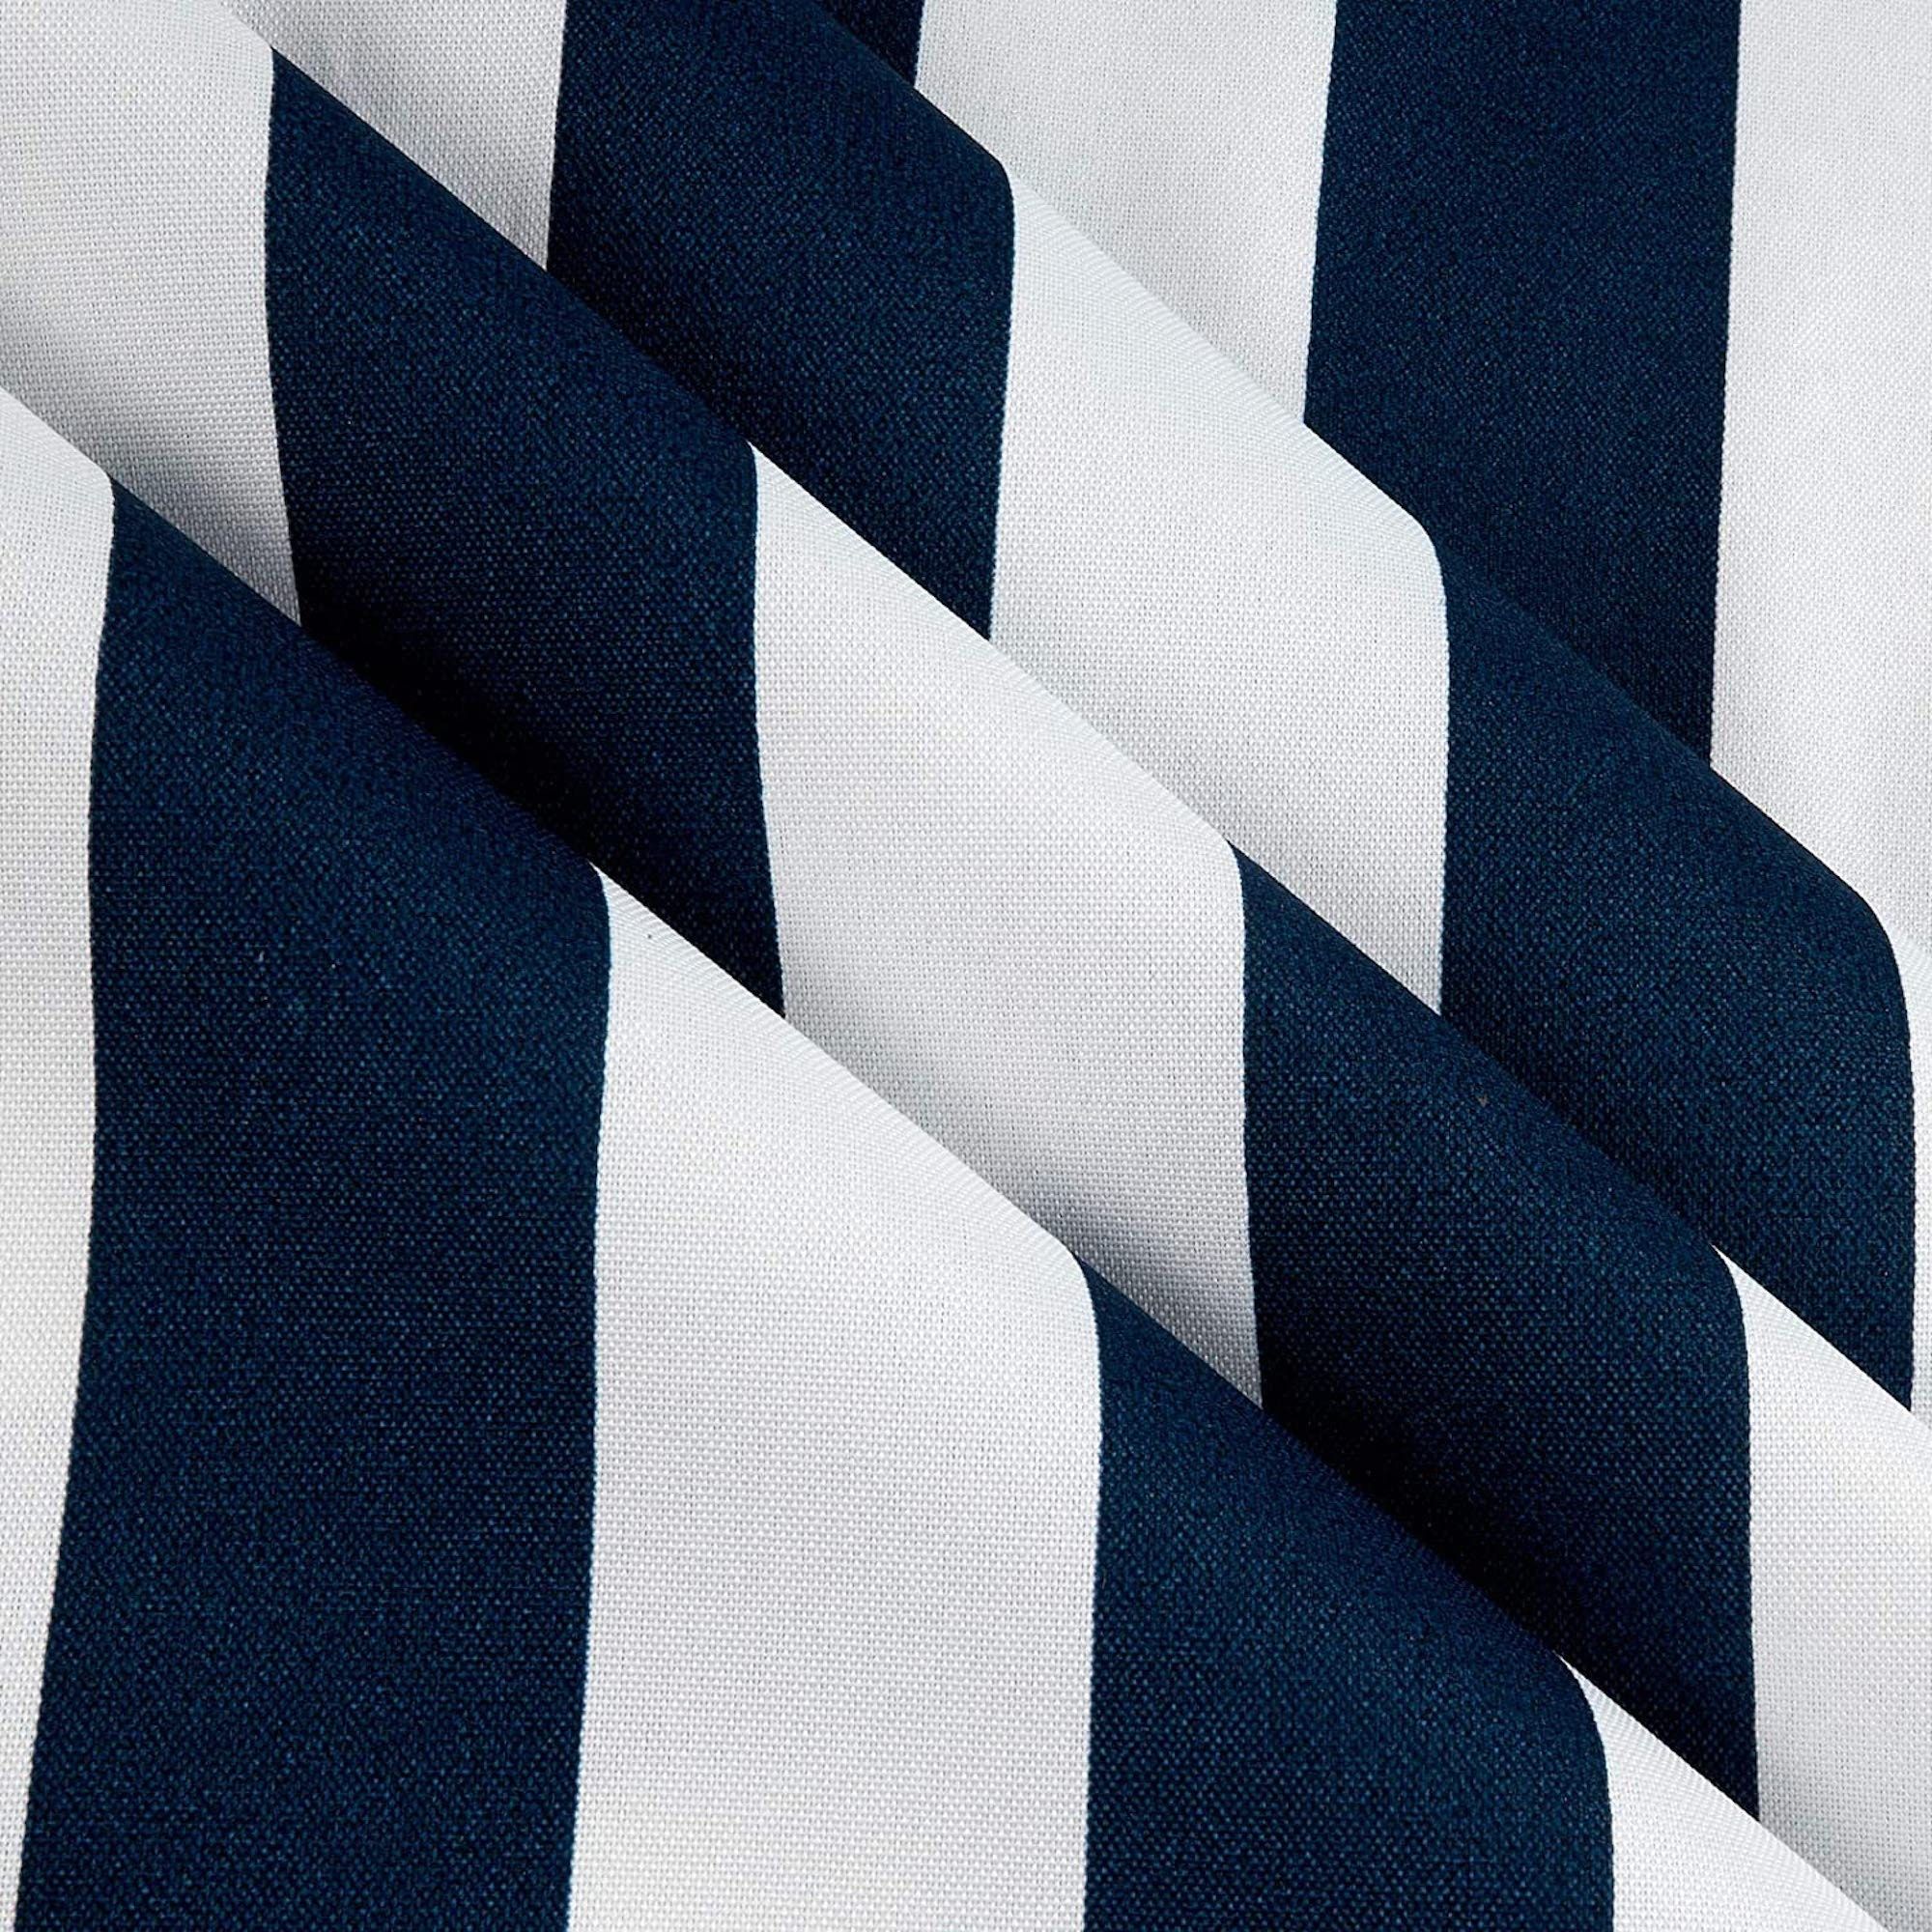 Black And White Stripe 2 Fabric, Navy Blue Striped Cotton, Fabric In Navy Blue And White Striped Ottomans (View 10 of 20)